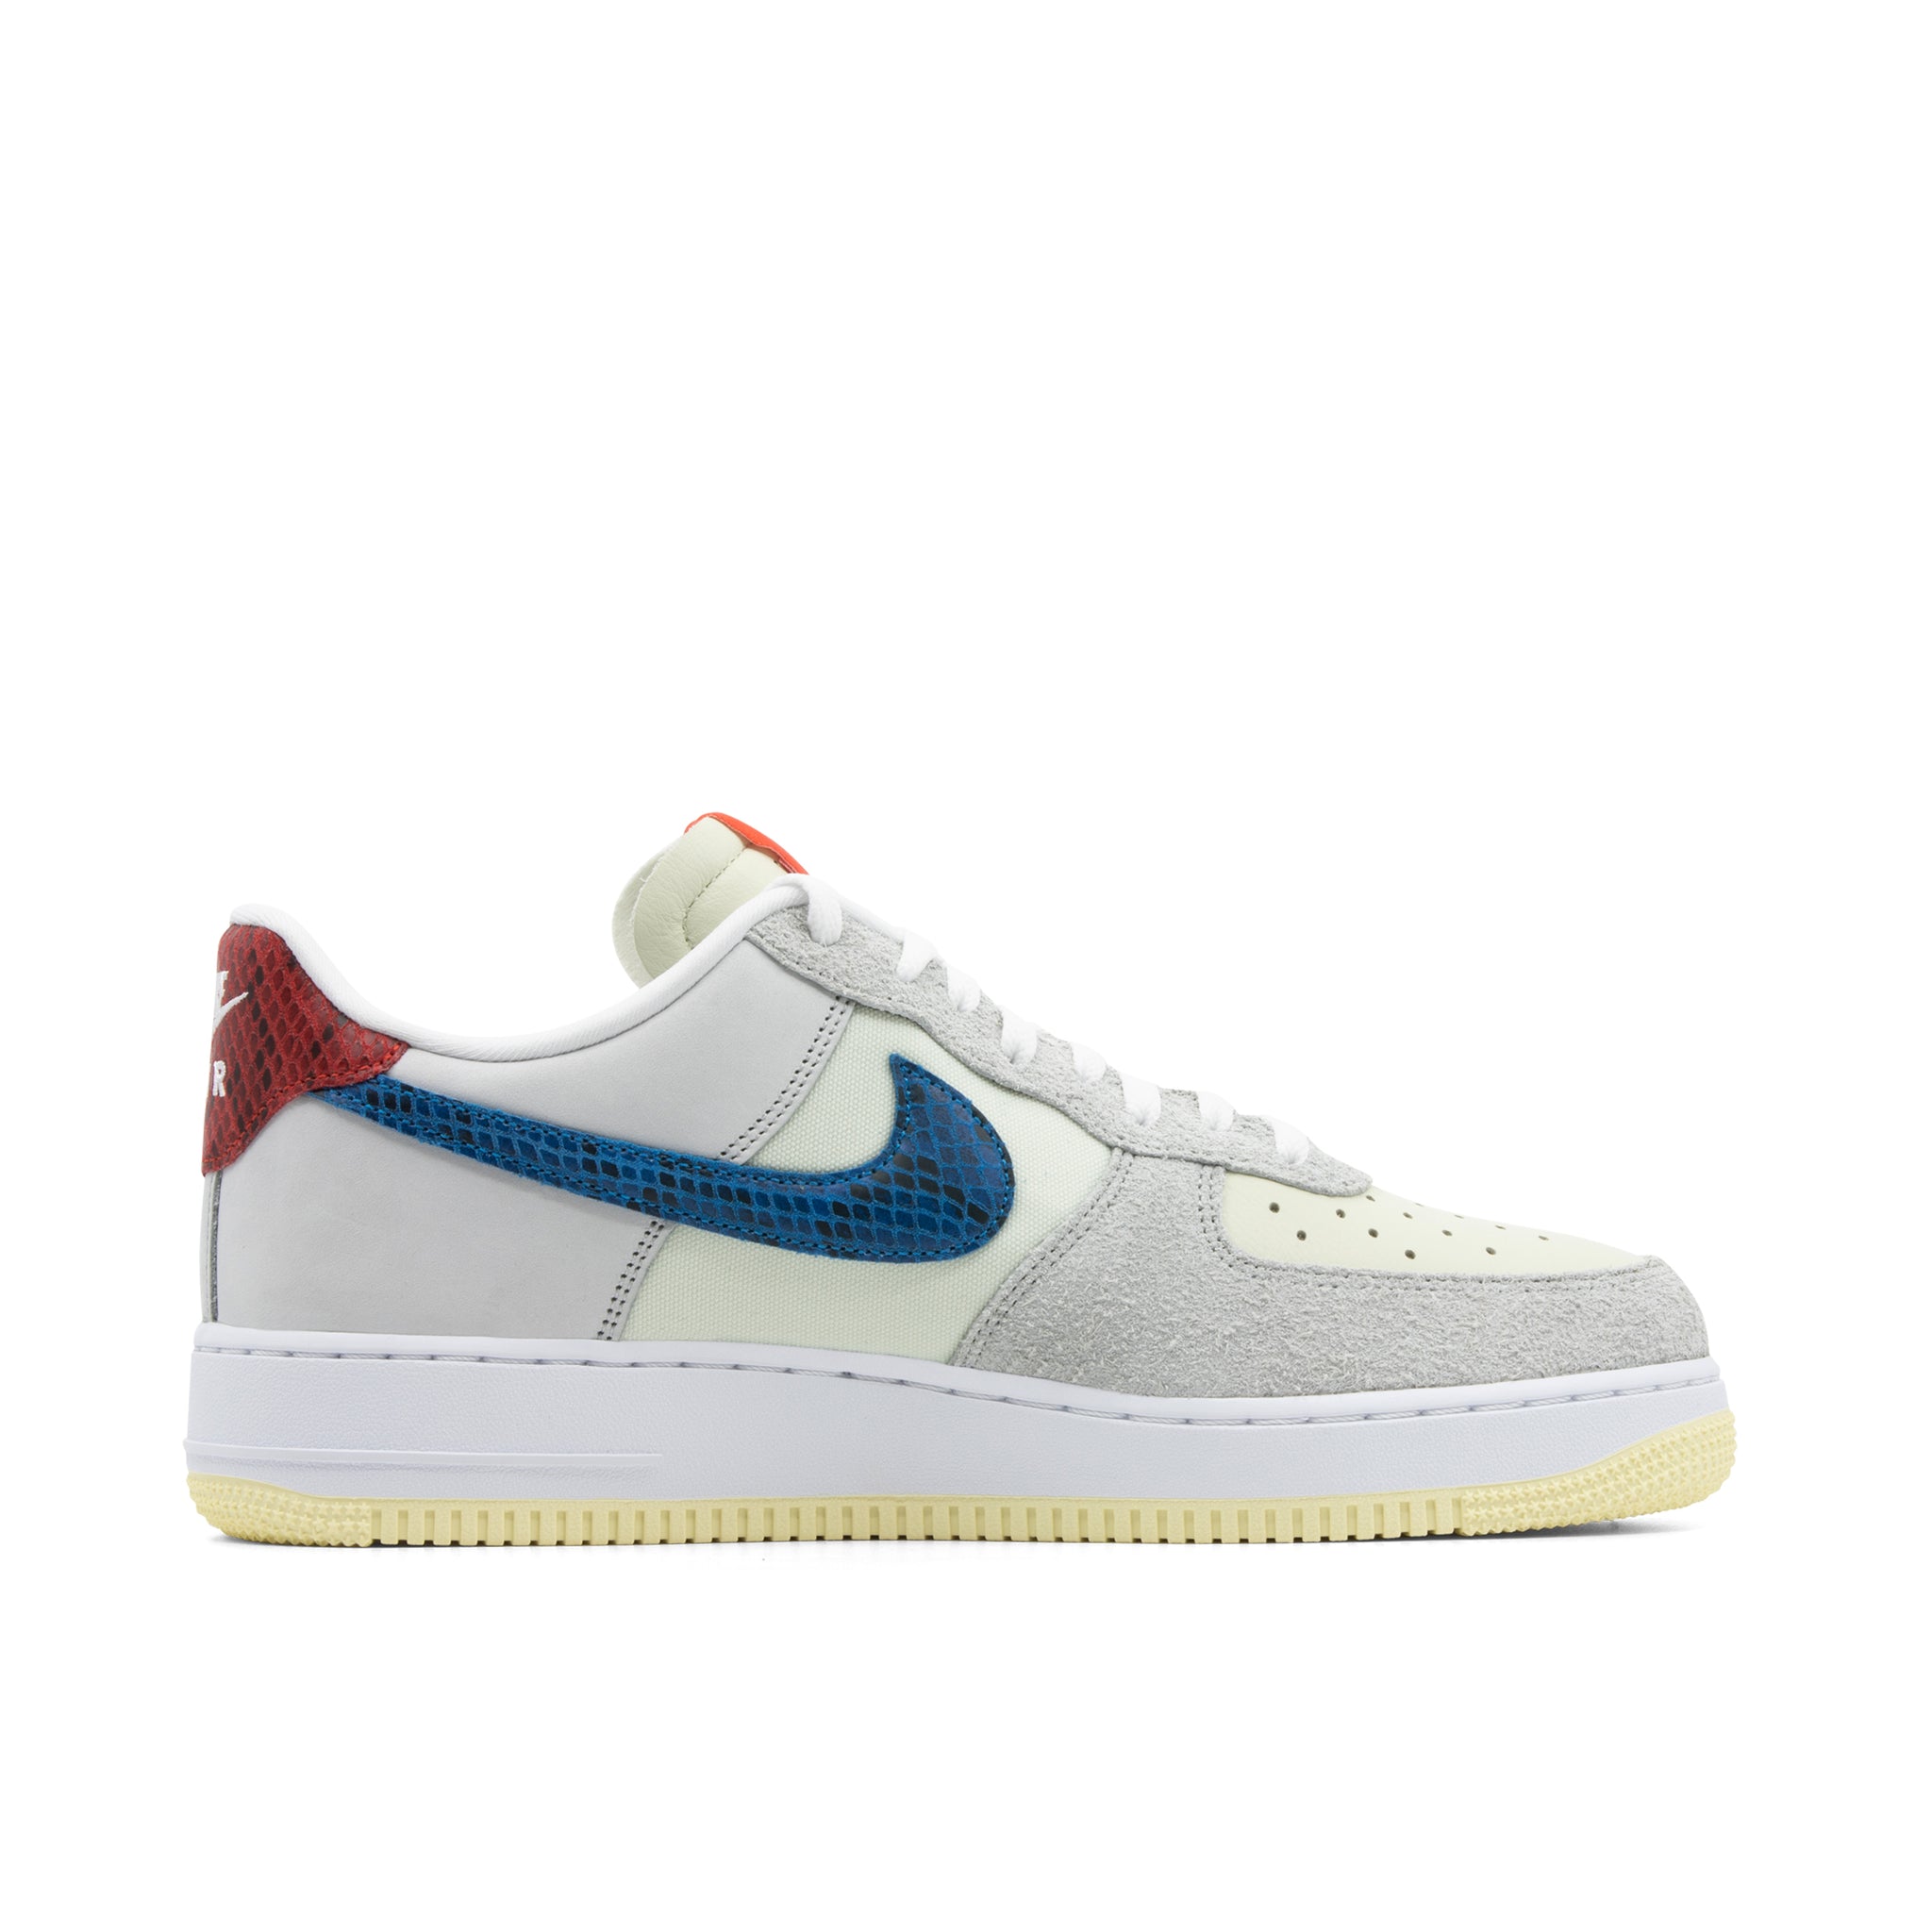 NIKE AIR FORCE 1 LOW UNDFTD 5 ON IT